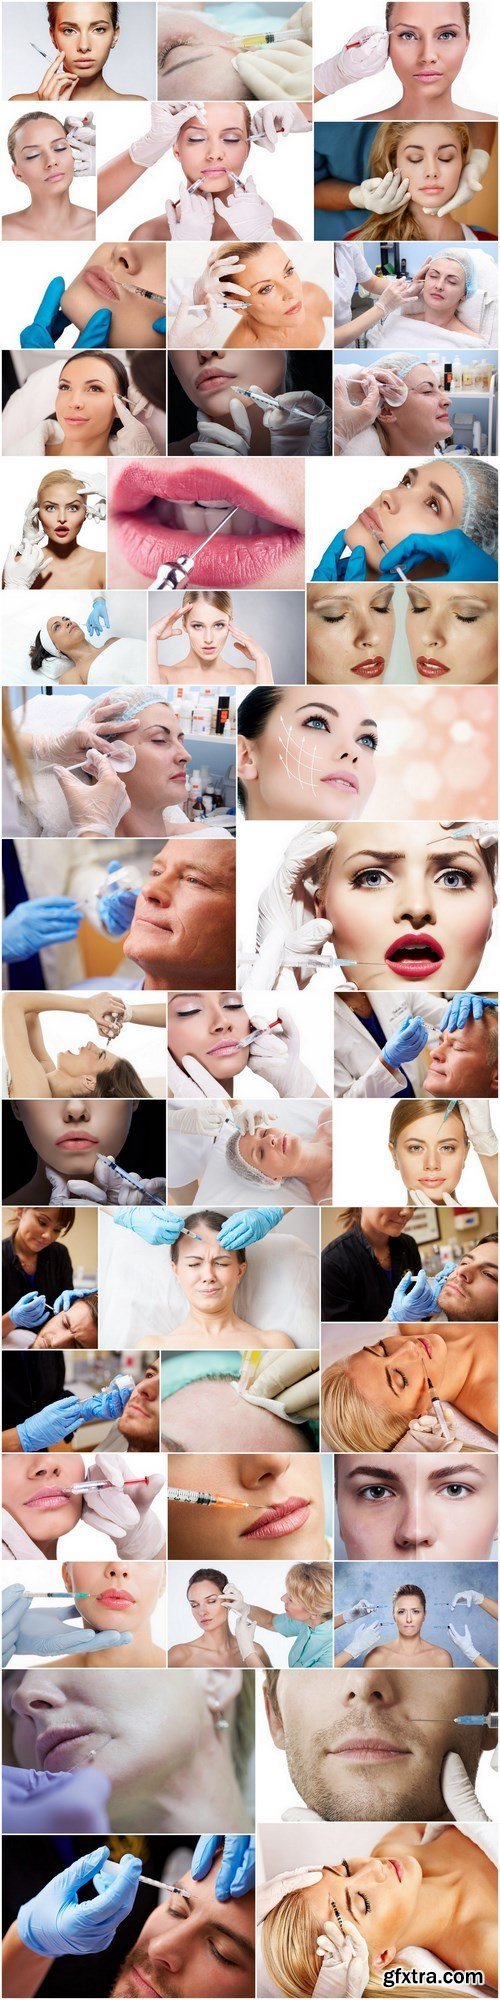 Cosmetology and Botox Injection - Set of 44xUHQ JPEG Professional Stock Images